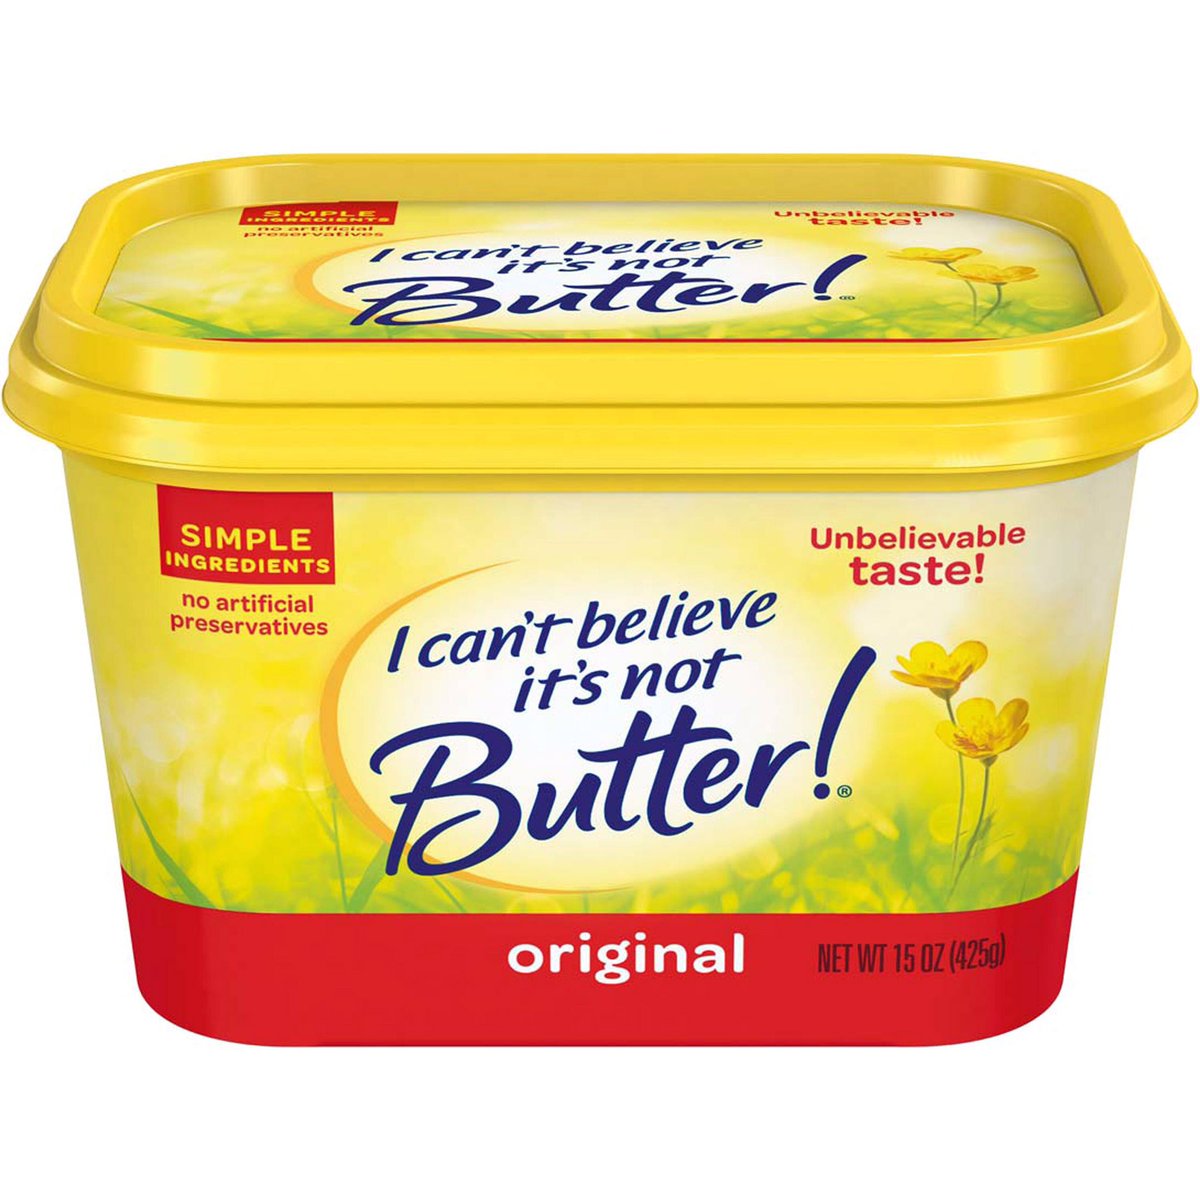 Can’t hear Can’t speak Can’t see Can’t believe it’s not butter.